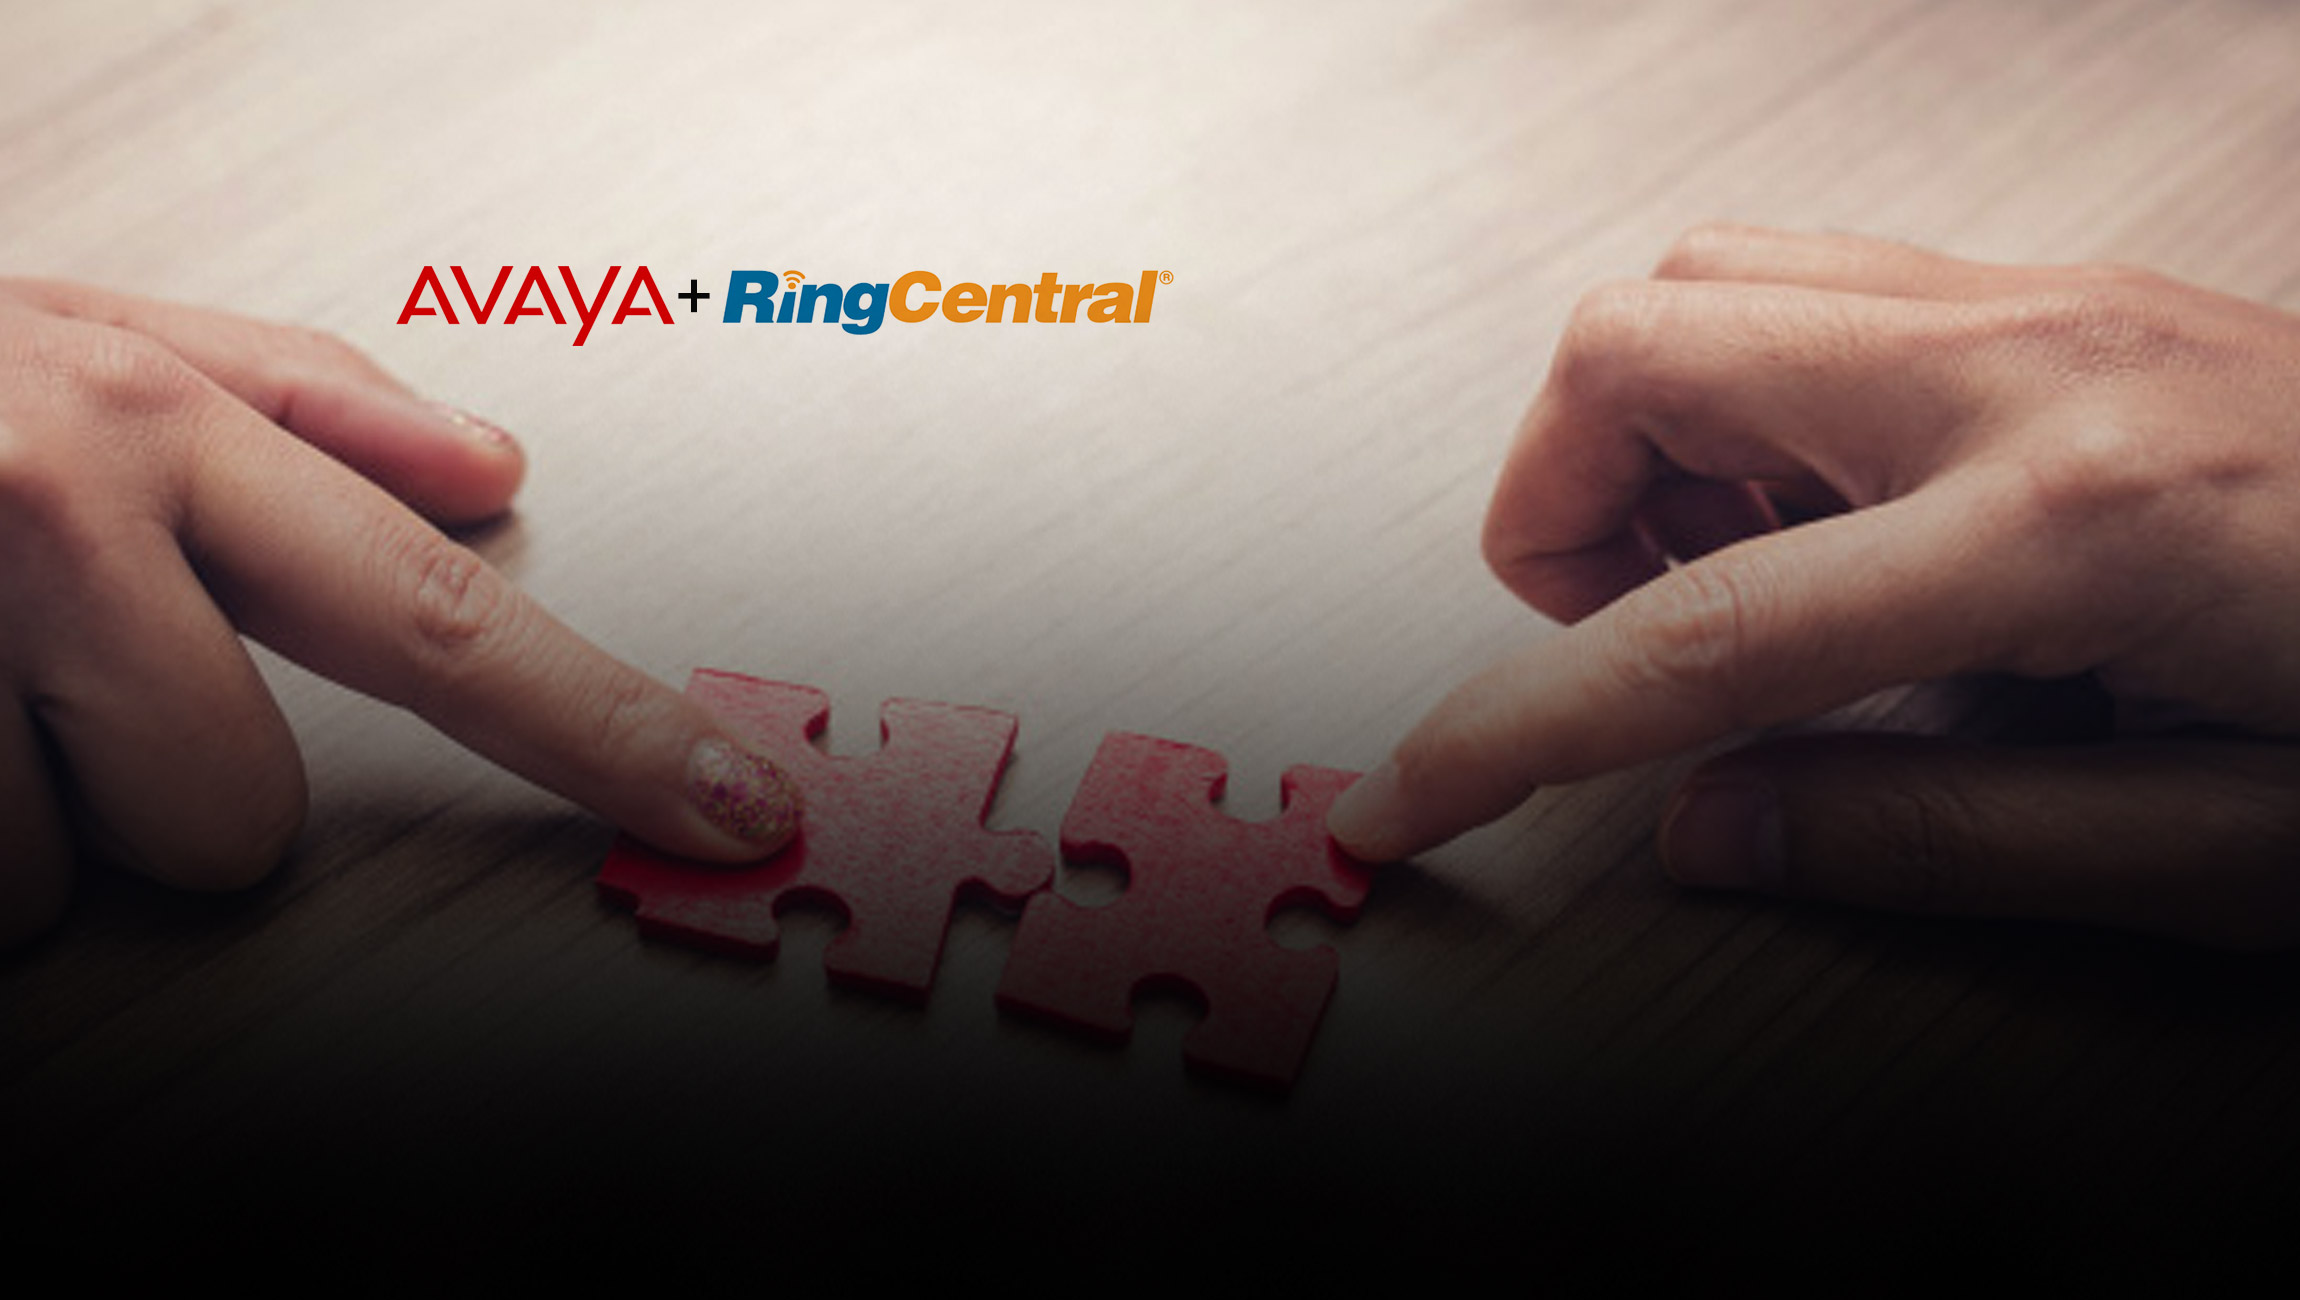 Avaya and RingCentral Introduce Avaya Cloud Office, Making Cloud Communications Simple